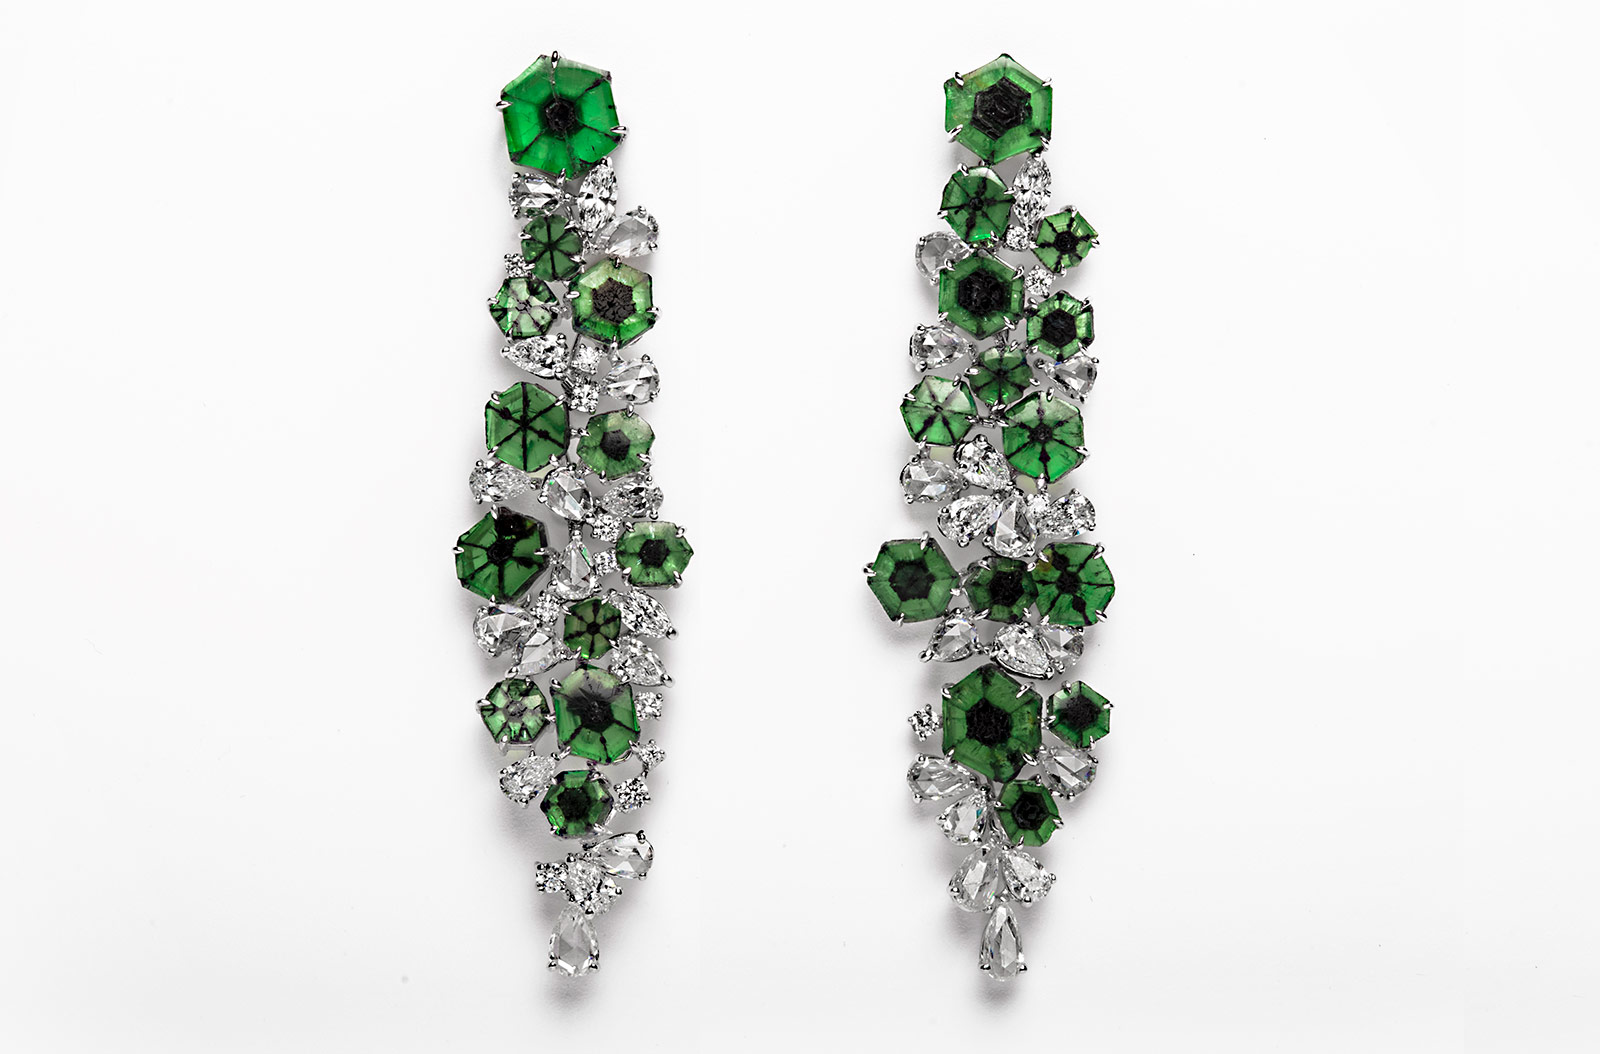 Qiu Fine Jewellery earrings from the 'Shanghai/Shanghai' collection with 21.21ct of trapiche emeralds and rose, marquise and pear cut diamonds